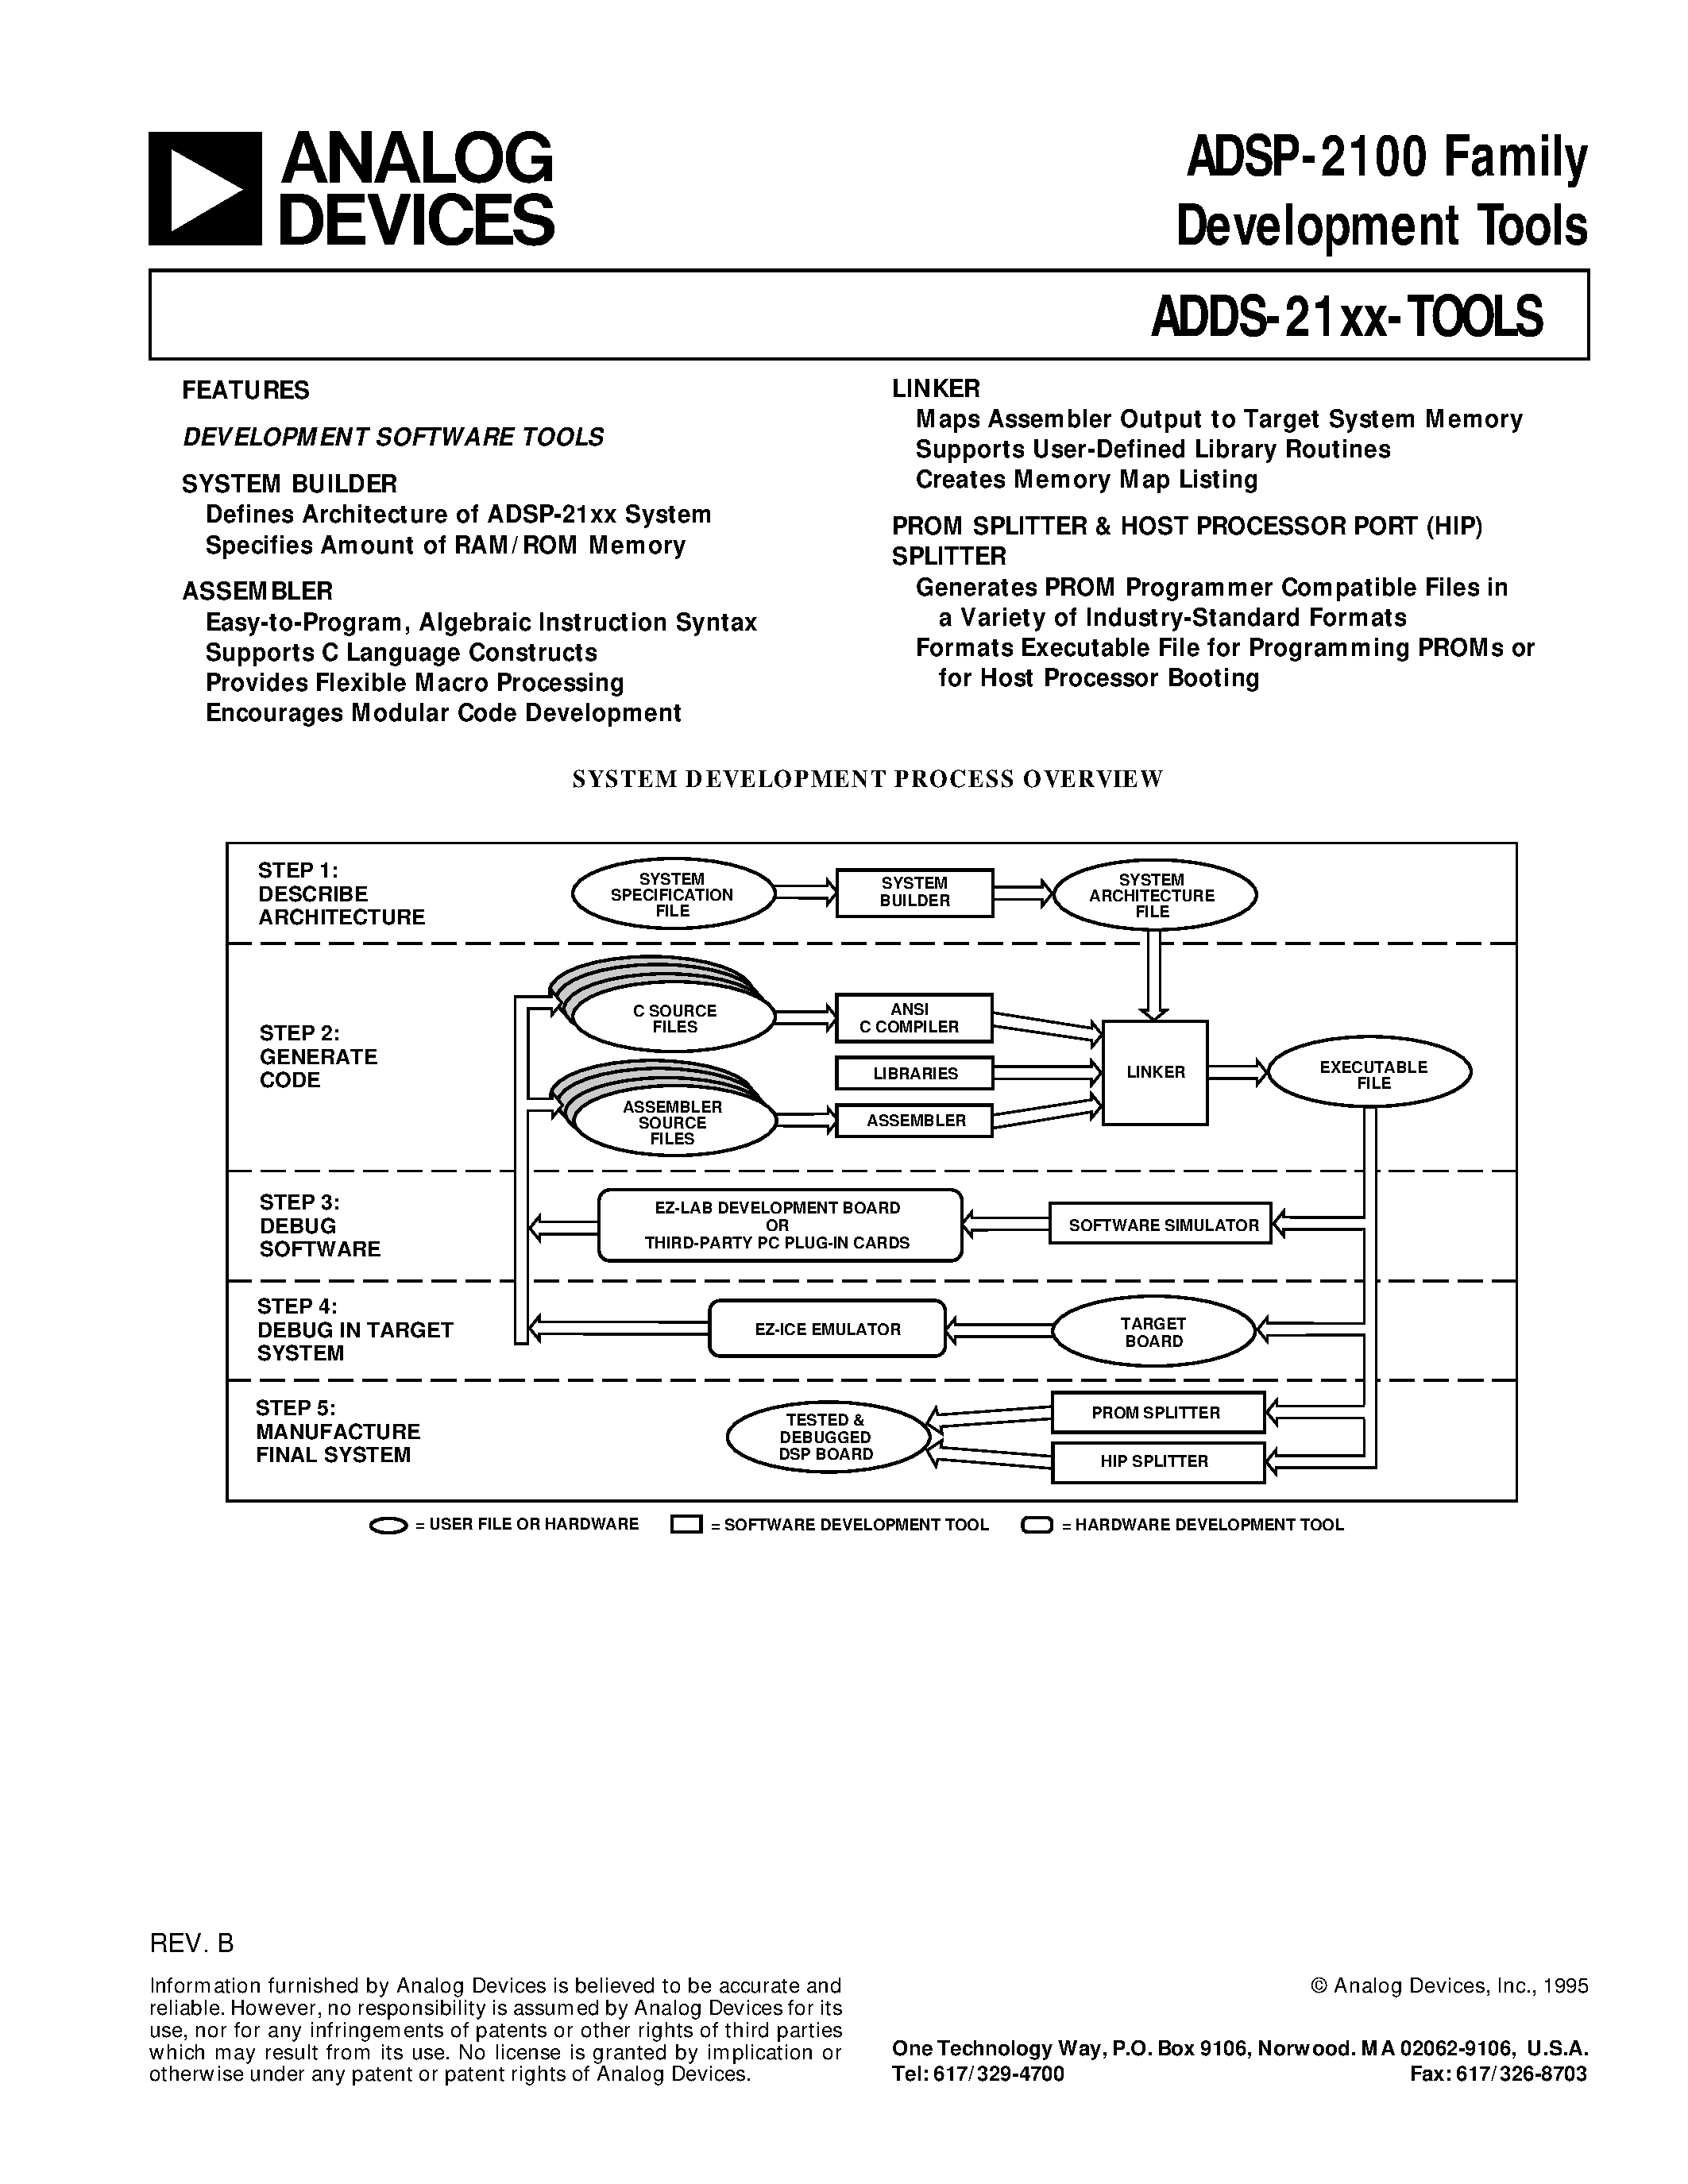 Datasheet ADDS-21XX-TOOLS - ADSP-2100 Family Development Tools page 1